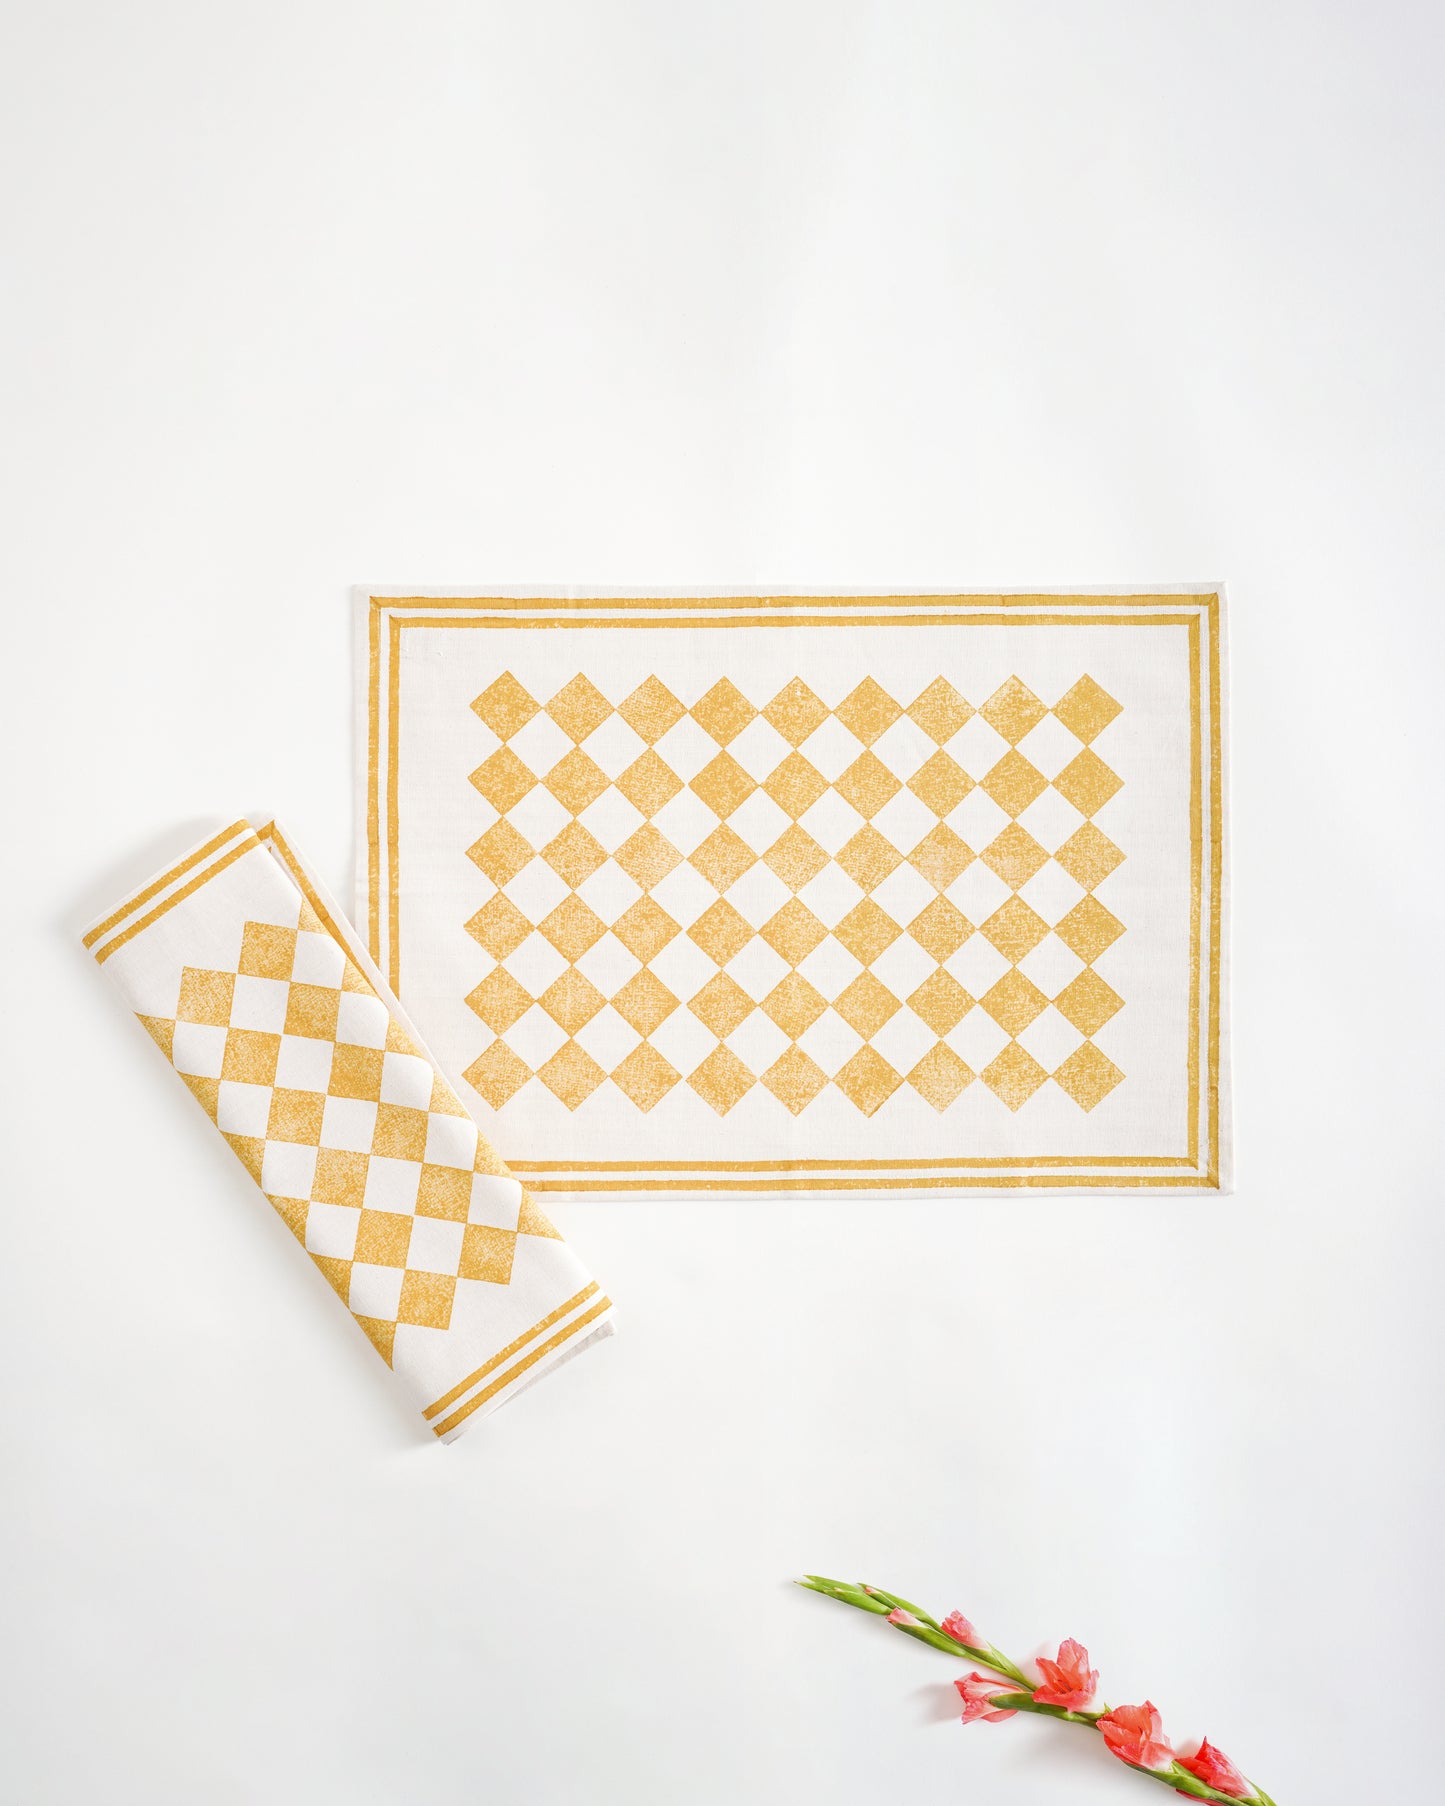 Chessboard Tablemats ,Corn Yellow ( Set of 2 )